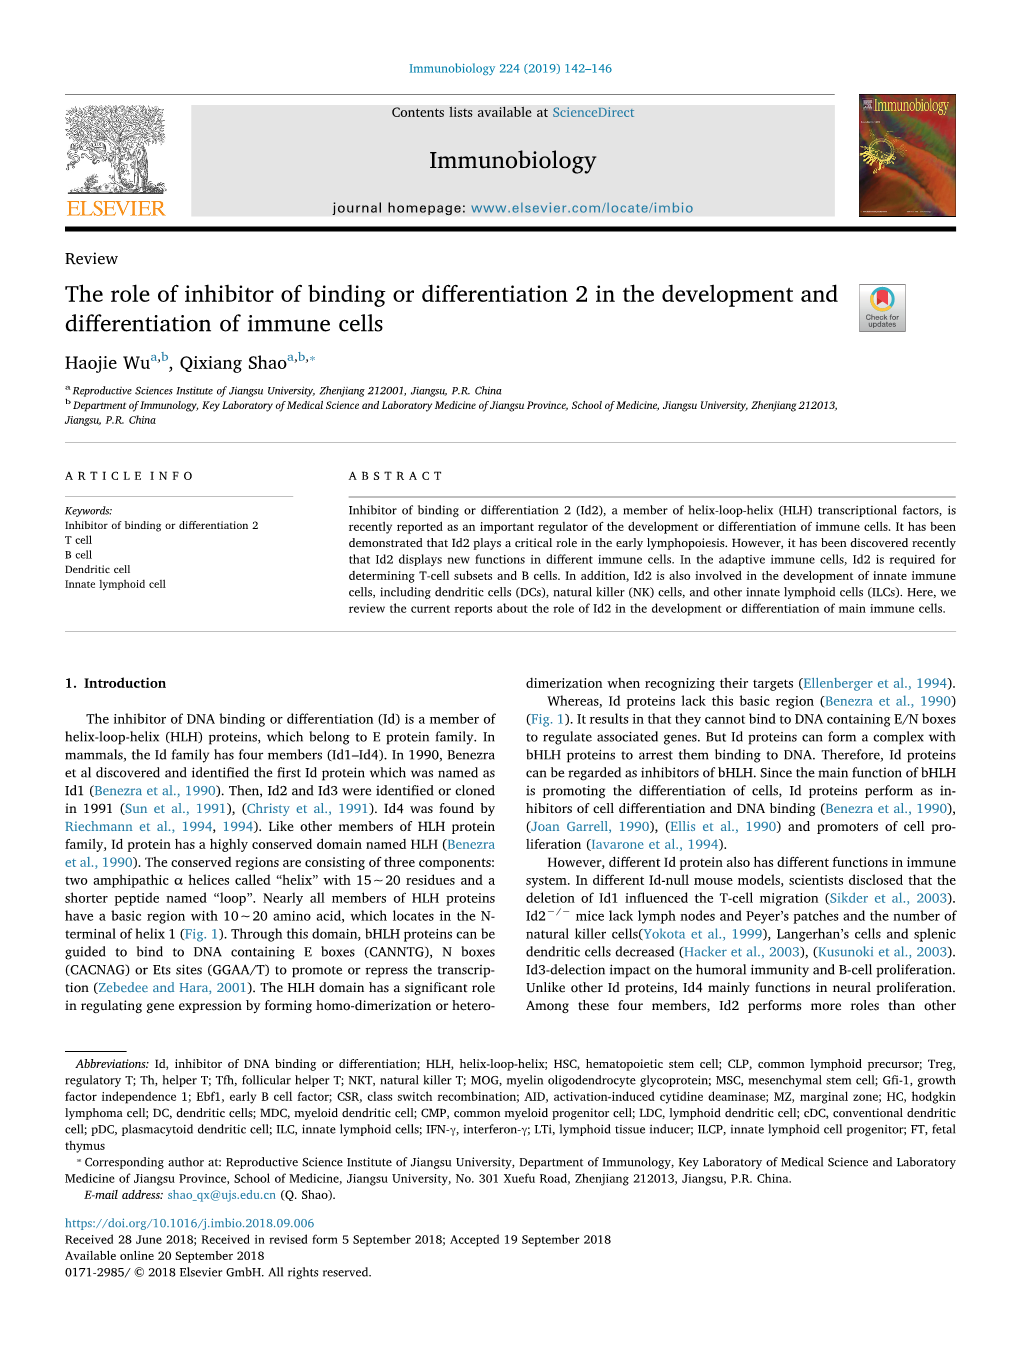 The Role of Inhibitor of Binding Or Differentiation 2 in the Development